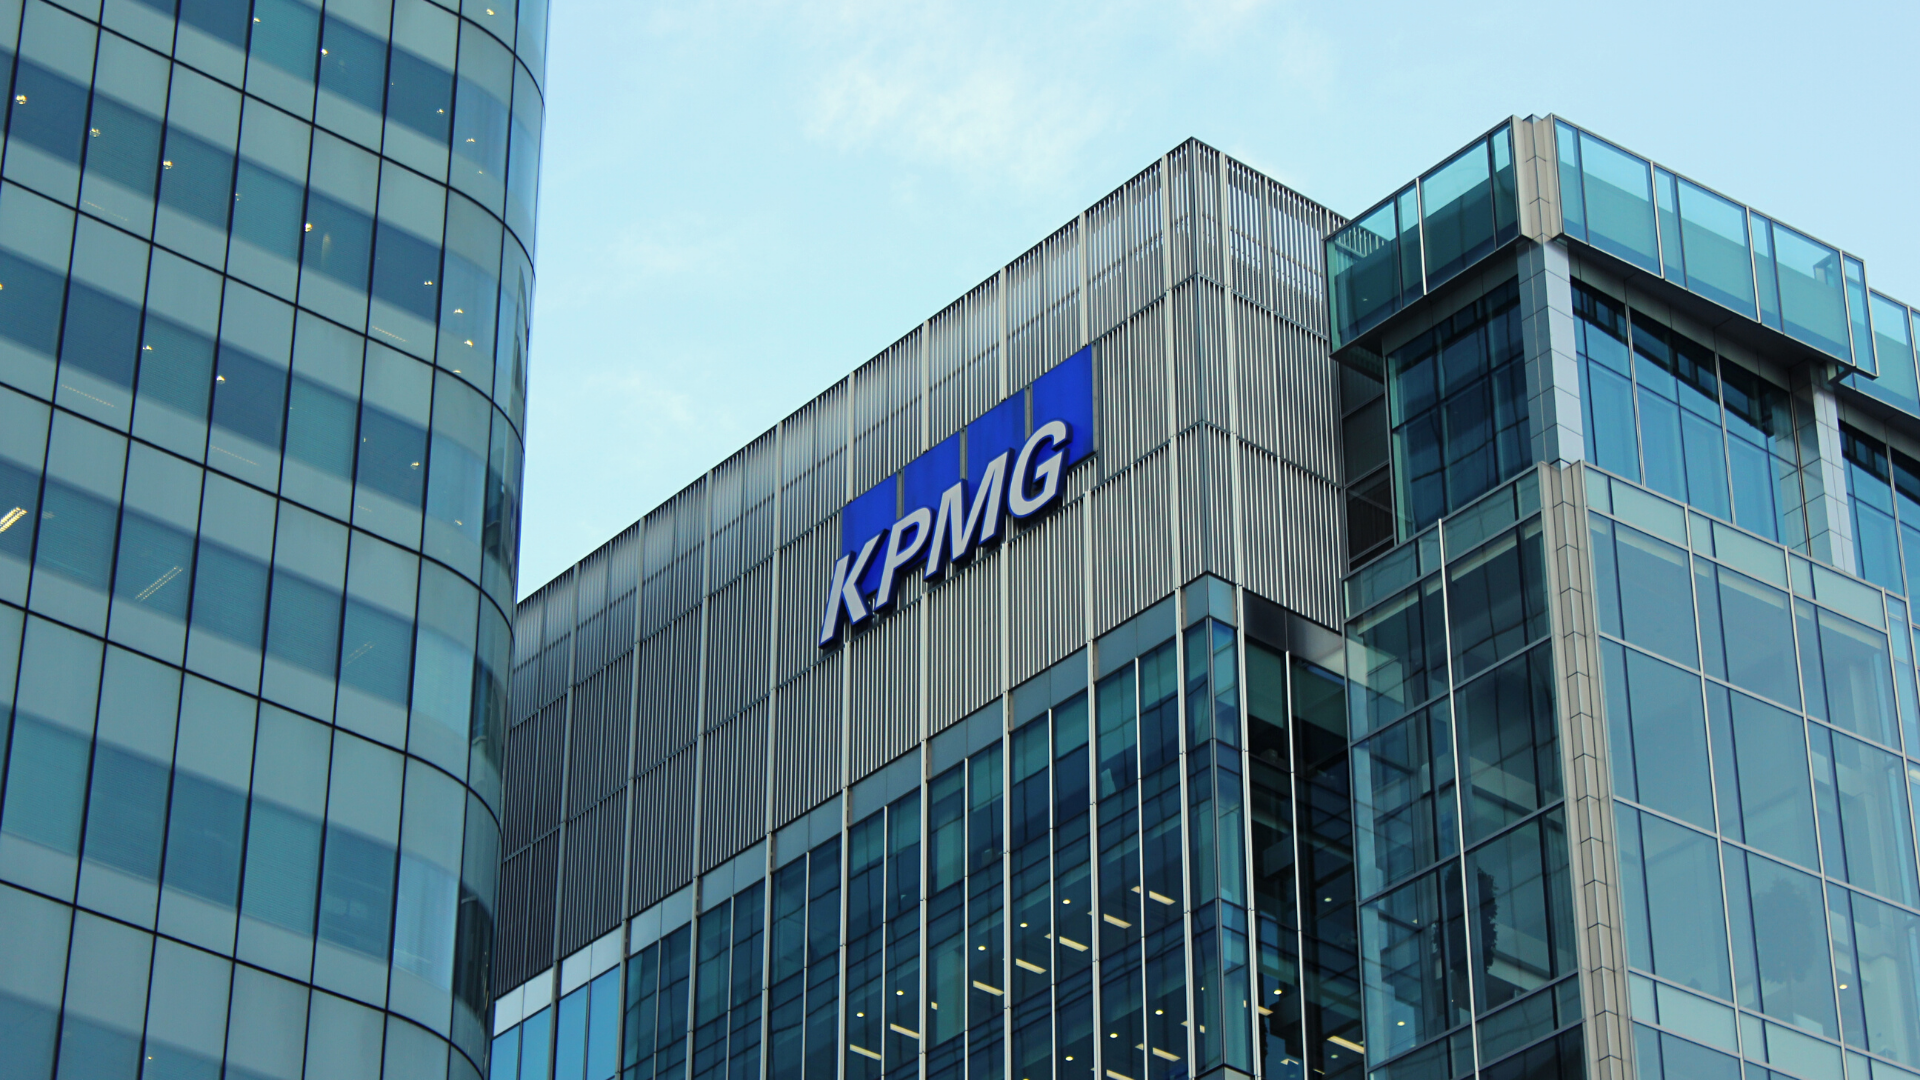 KPMG usually has hundreds of graduate roles but the market is very competitive. Image credit: Paul Wilkinson / Flickr